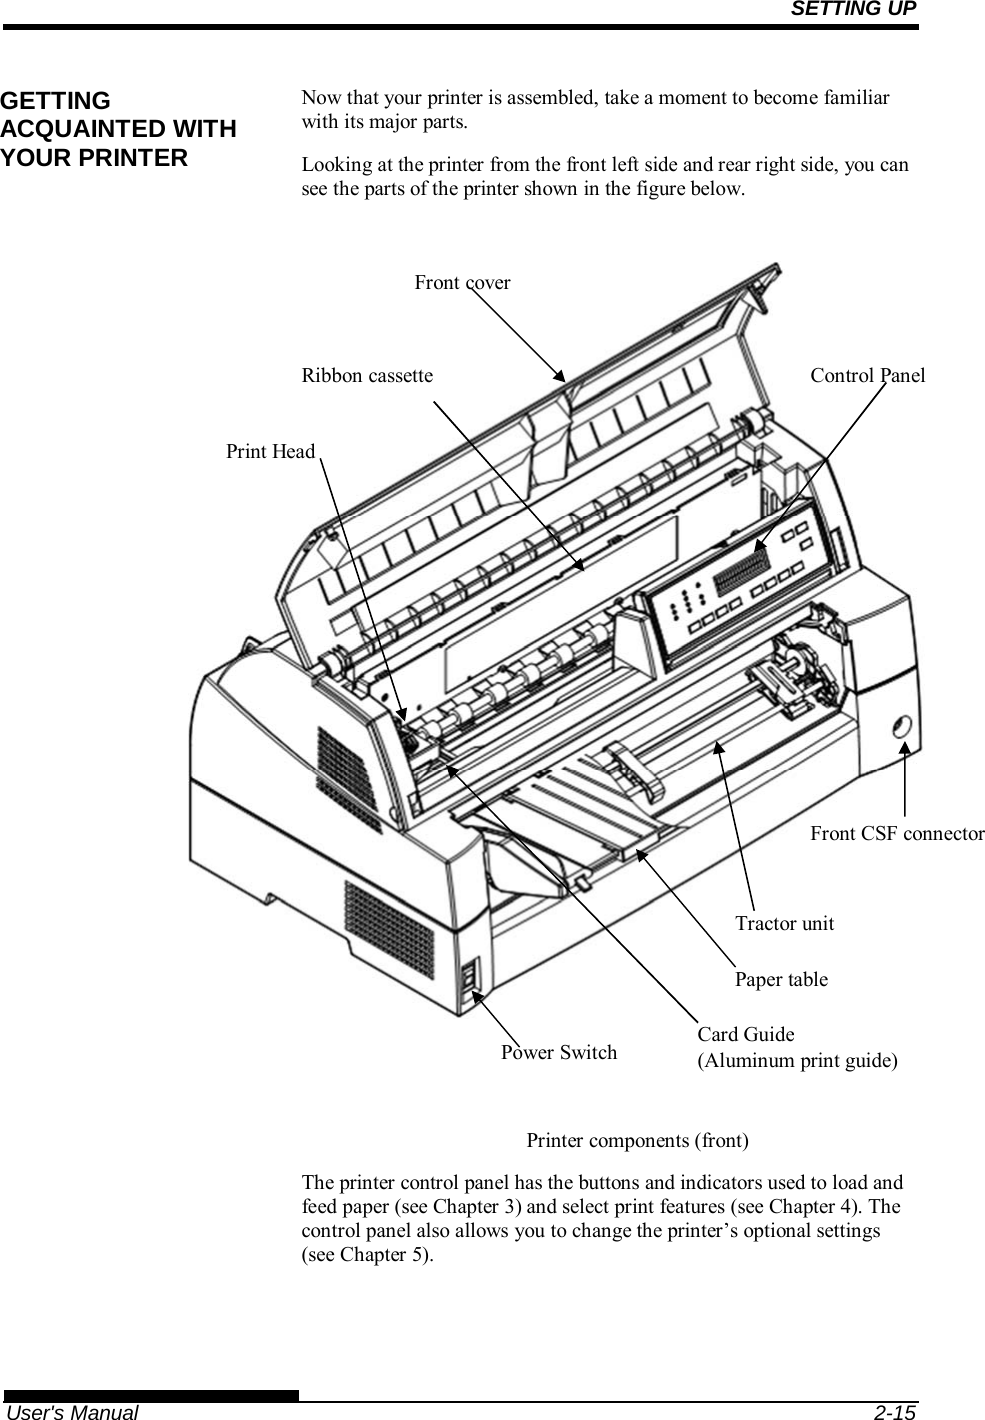 SETTING UP   User&apos;s Manual  2-15 Now that your printer is assembled, take a moment to become familiar with its major parts. Looking at the printer from the front left side and rear right side, you can see the parts of the printer shown in the figure below.     Printer components (front) The printer control panel has the buttons and indicators used to load and feed paper (see Chapter 3) and select print features (see Chapter 4). The control panel also allows you to change the printer’s optional settings (see Chapter 5).   GETTING ACQUAINTED WITH YOUR PRINTER Paper table Tractor unit Front cover Ribbon cassette  Control Panel Power Switch Front CSF connector Print Head Card Guide (Aluminum print guide) 